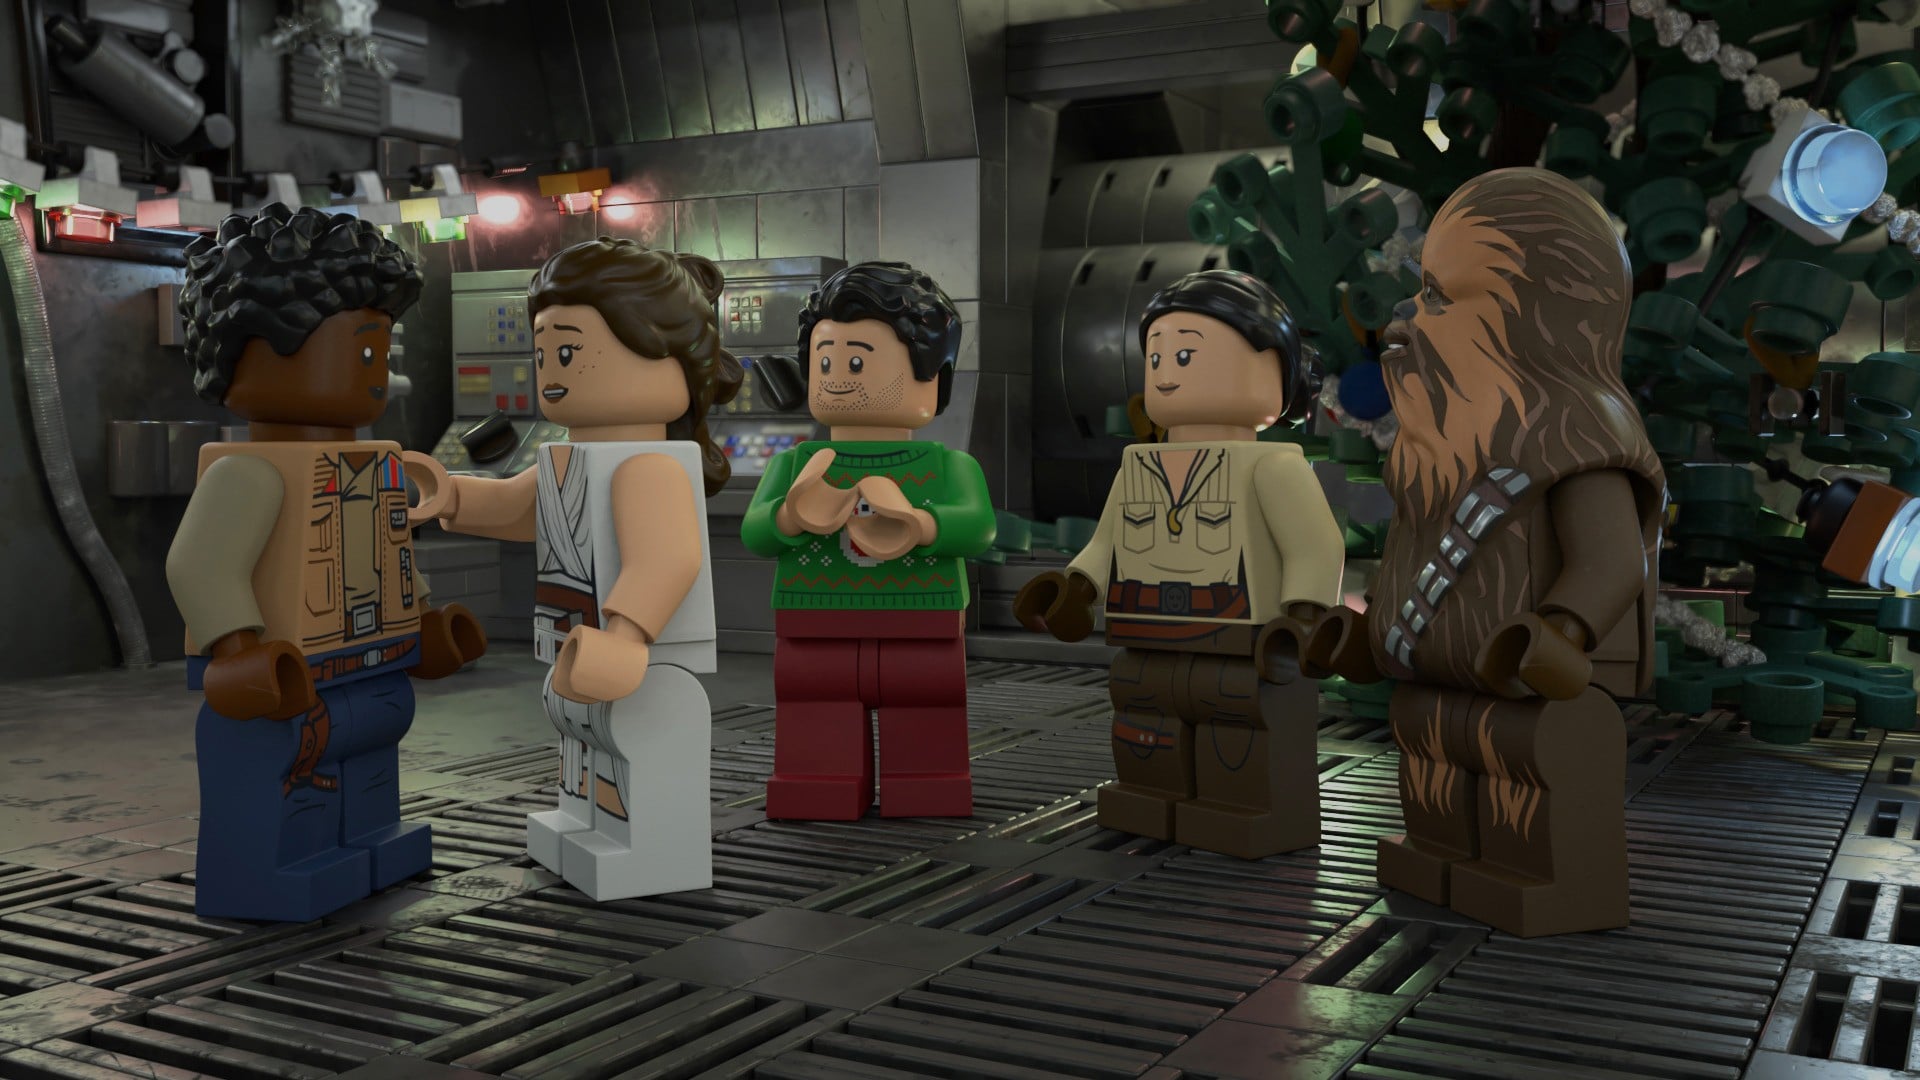 THE LEGO STAR WARS HOLIDAY SPECIAL, from left: Finn, Rey, Poe Dameron, Rose Tico (voice: Kelly Marie Tran), Chewie, (aired Nov. 17, 2020). photo: Disney+/Lucasfilm / Courtesy Everett Collection